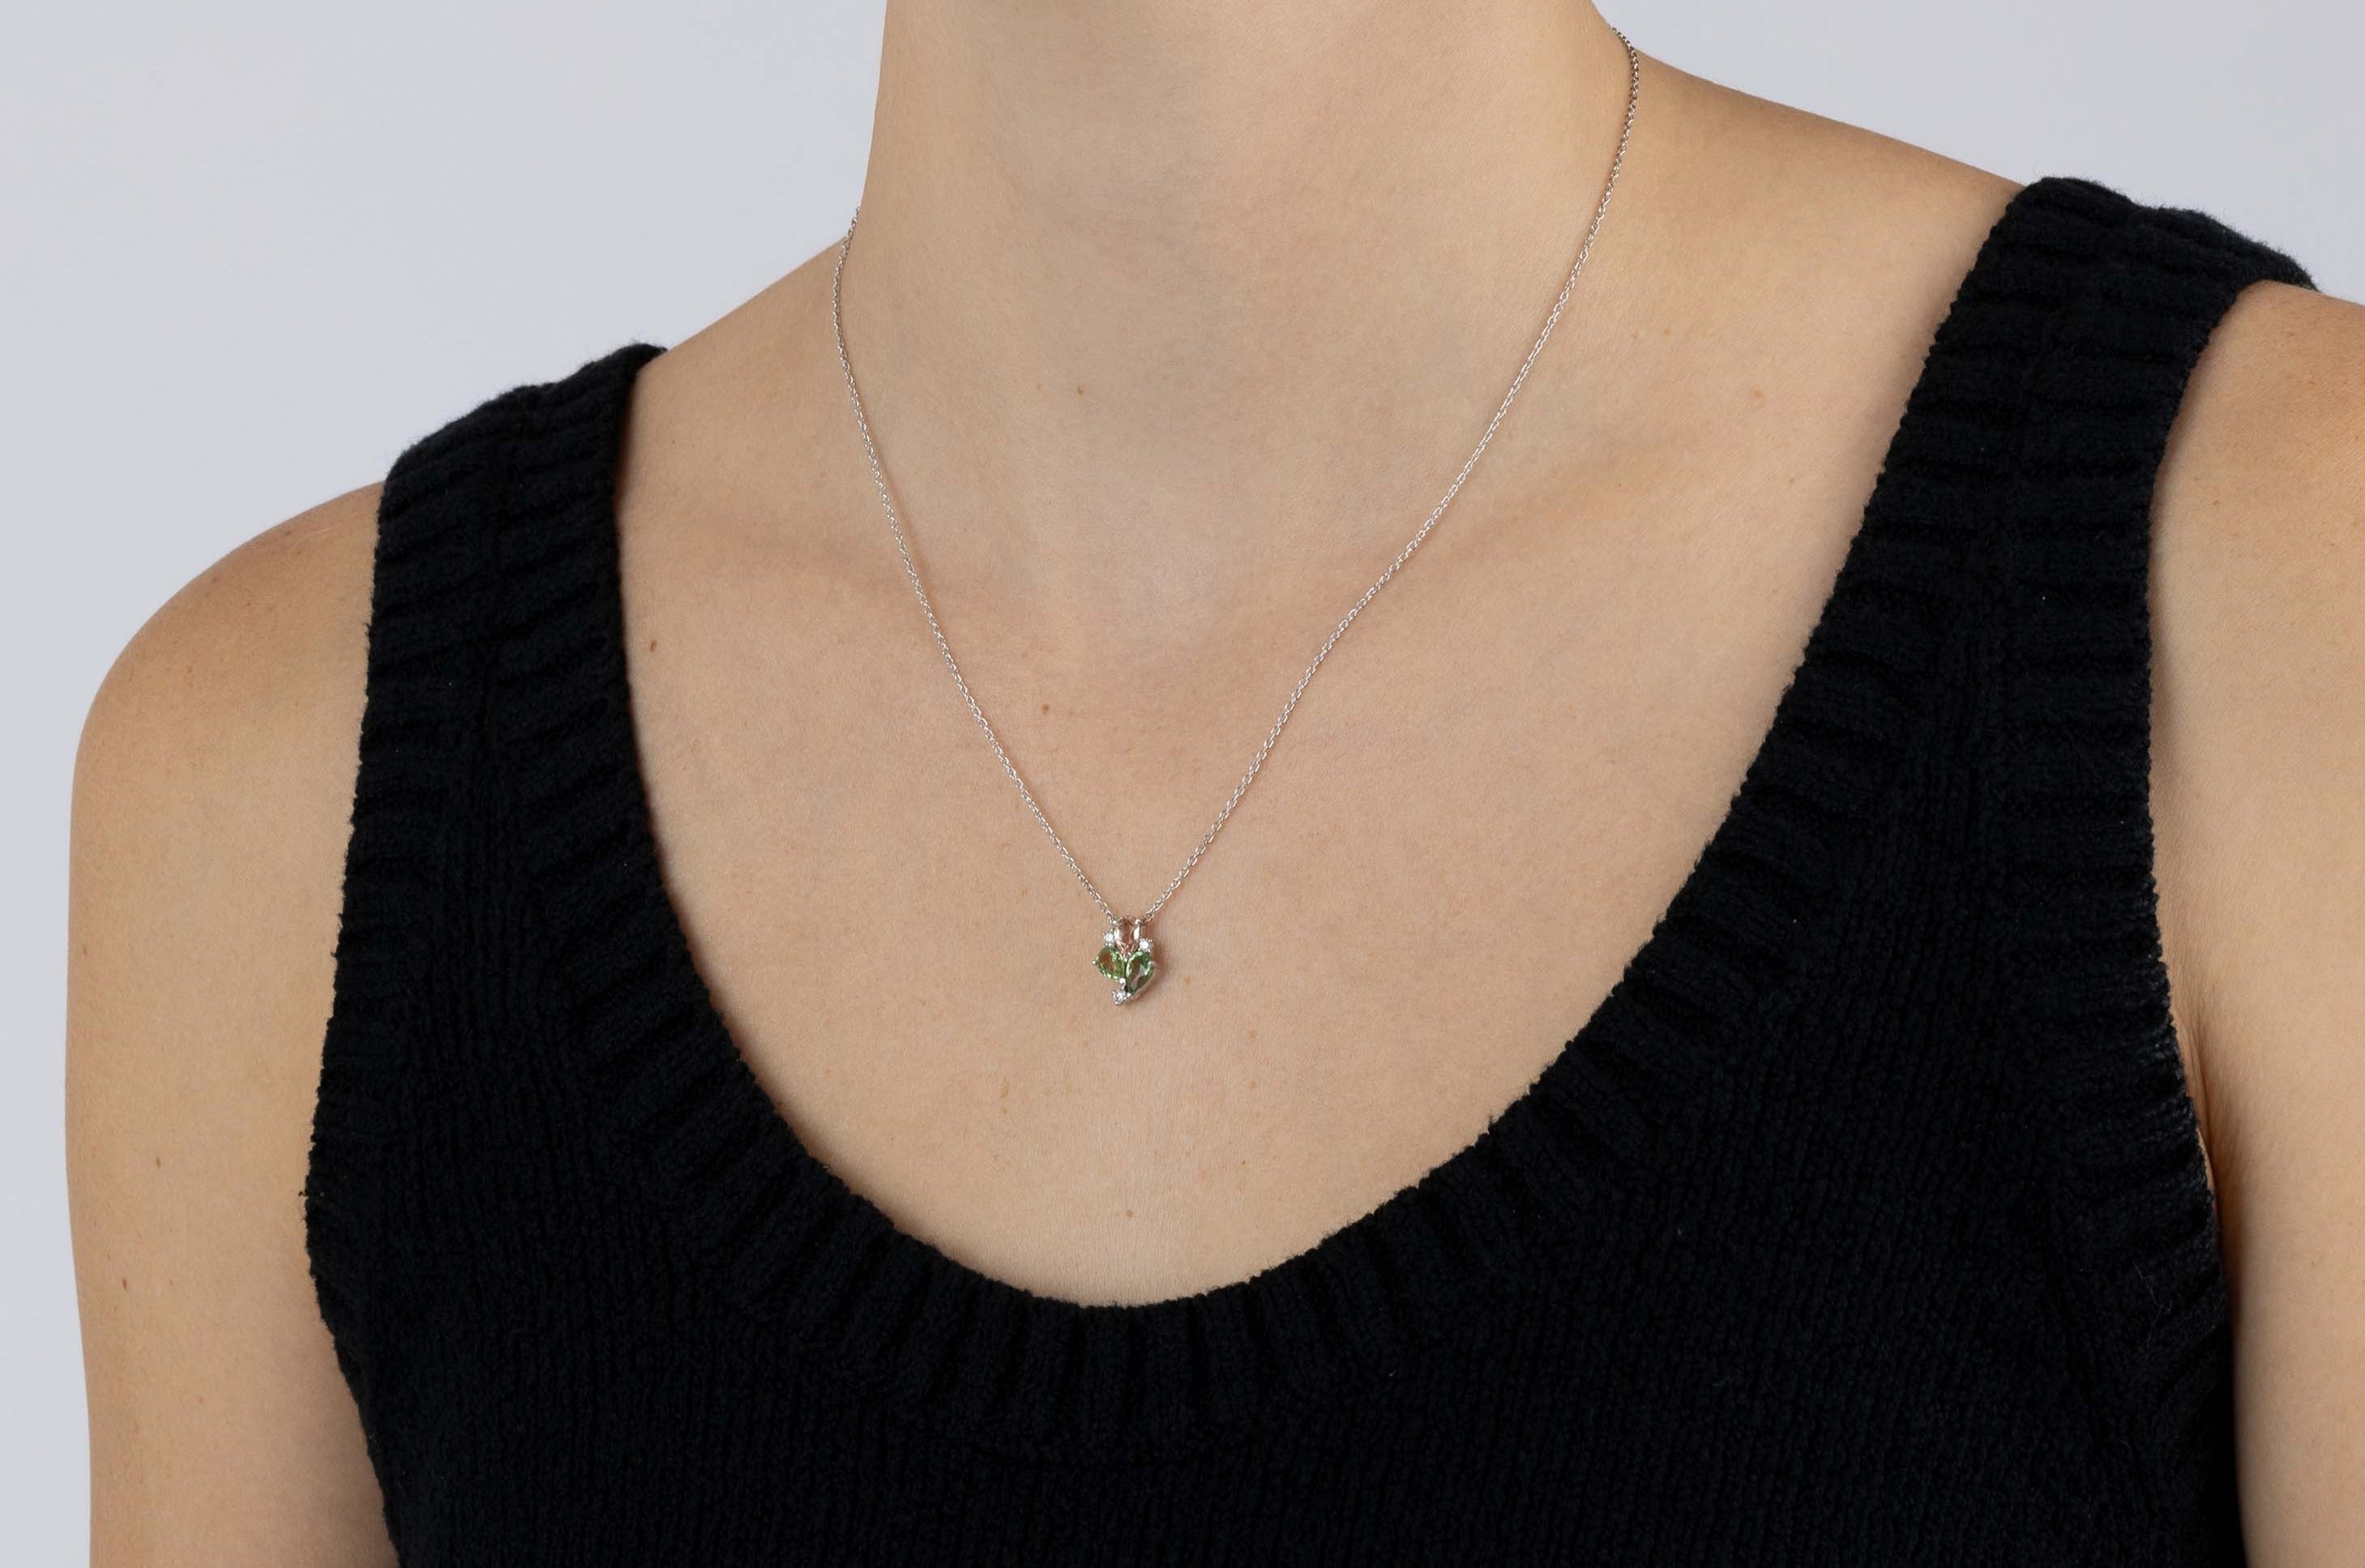 White Gold Necklace with Morganite, Green Sapphire, and Diamonds, Small - Model shot